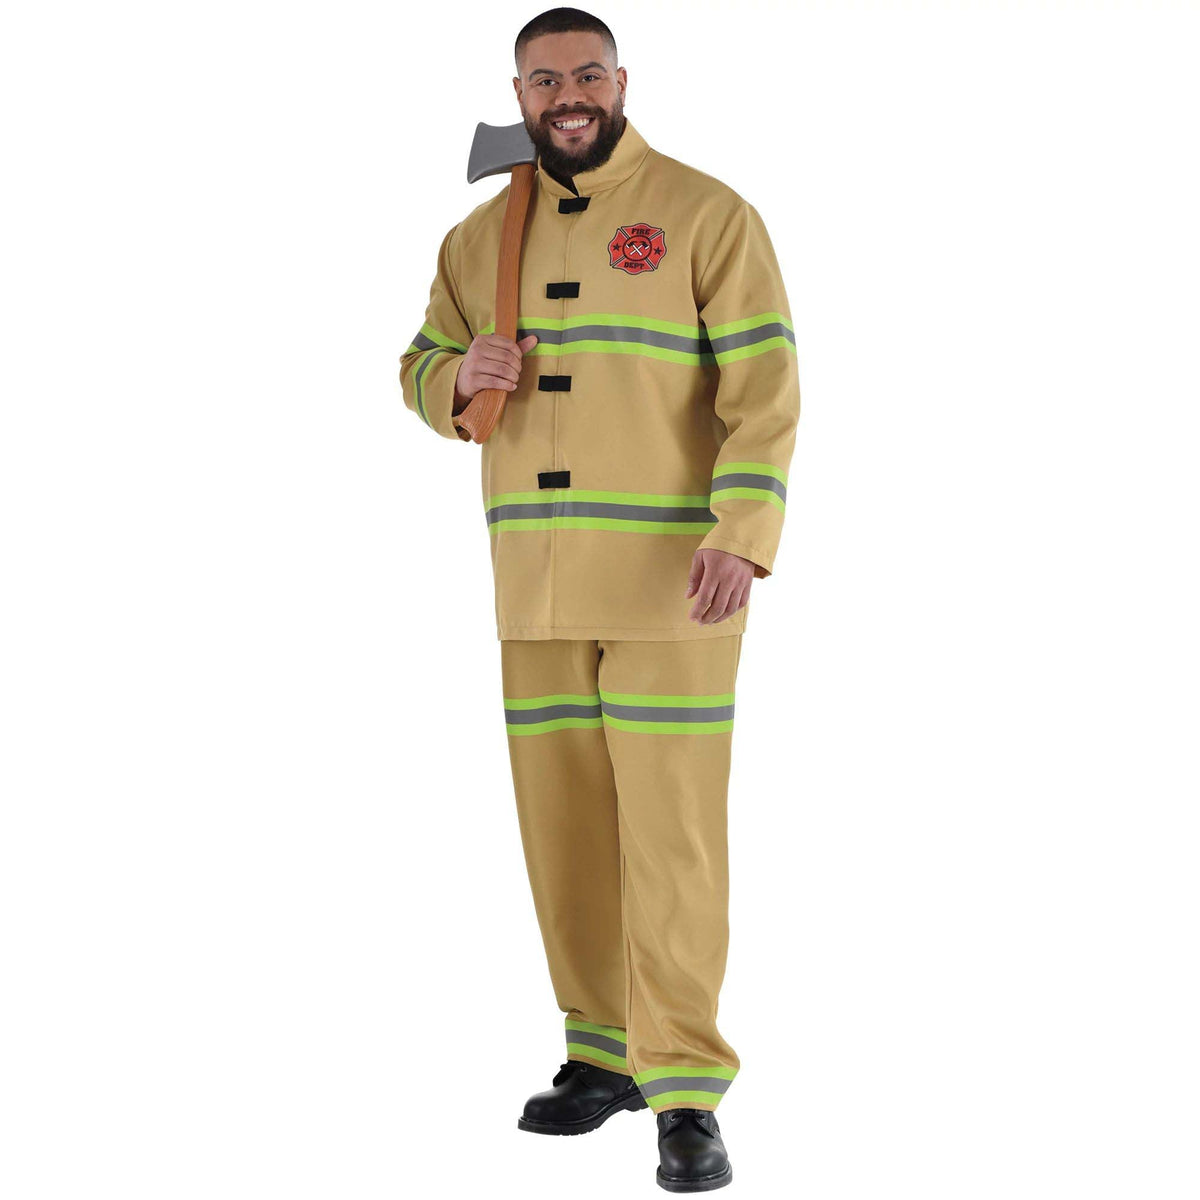 HALLOWEEN COSTUME CO. Costumes Firefighter Costume for Plus Size Adults, Jacket and pants